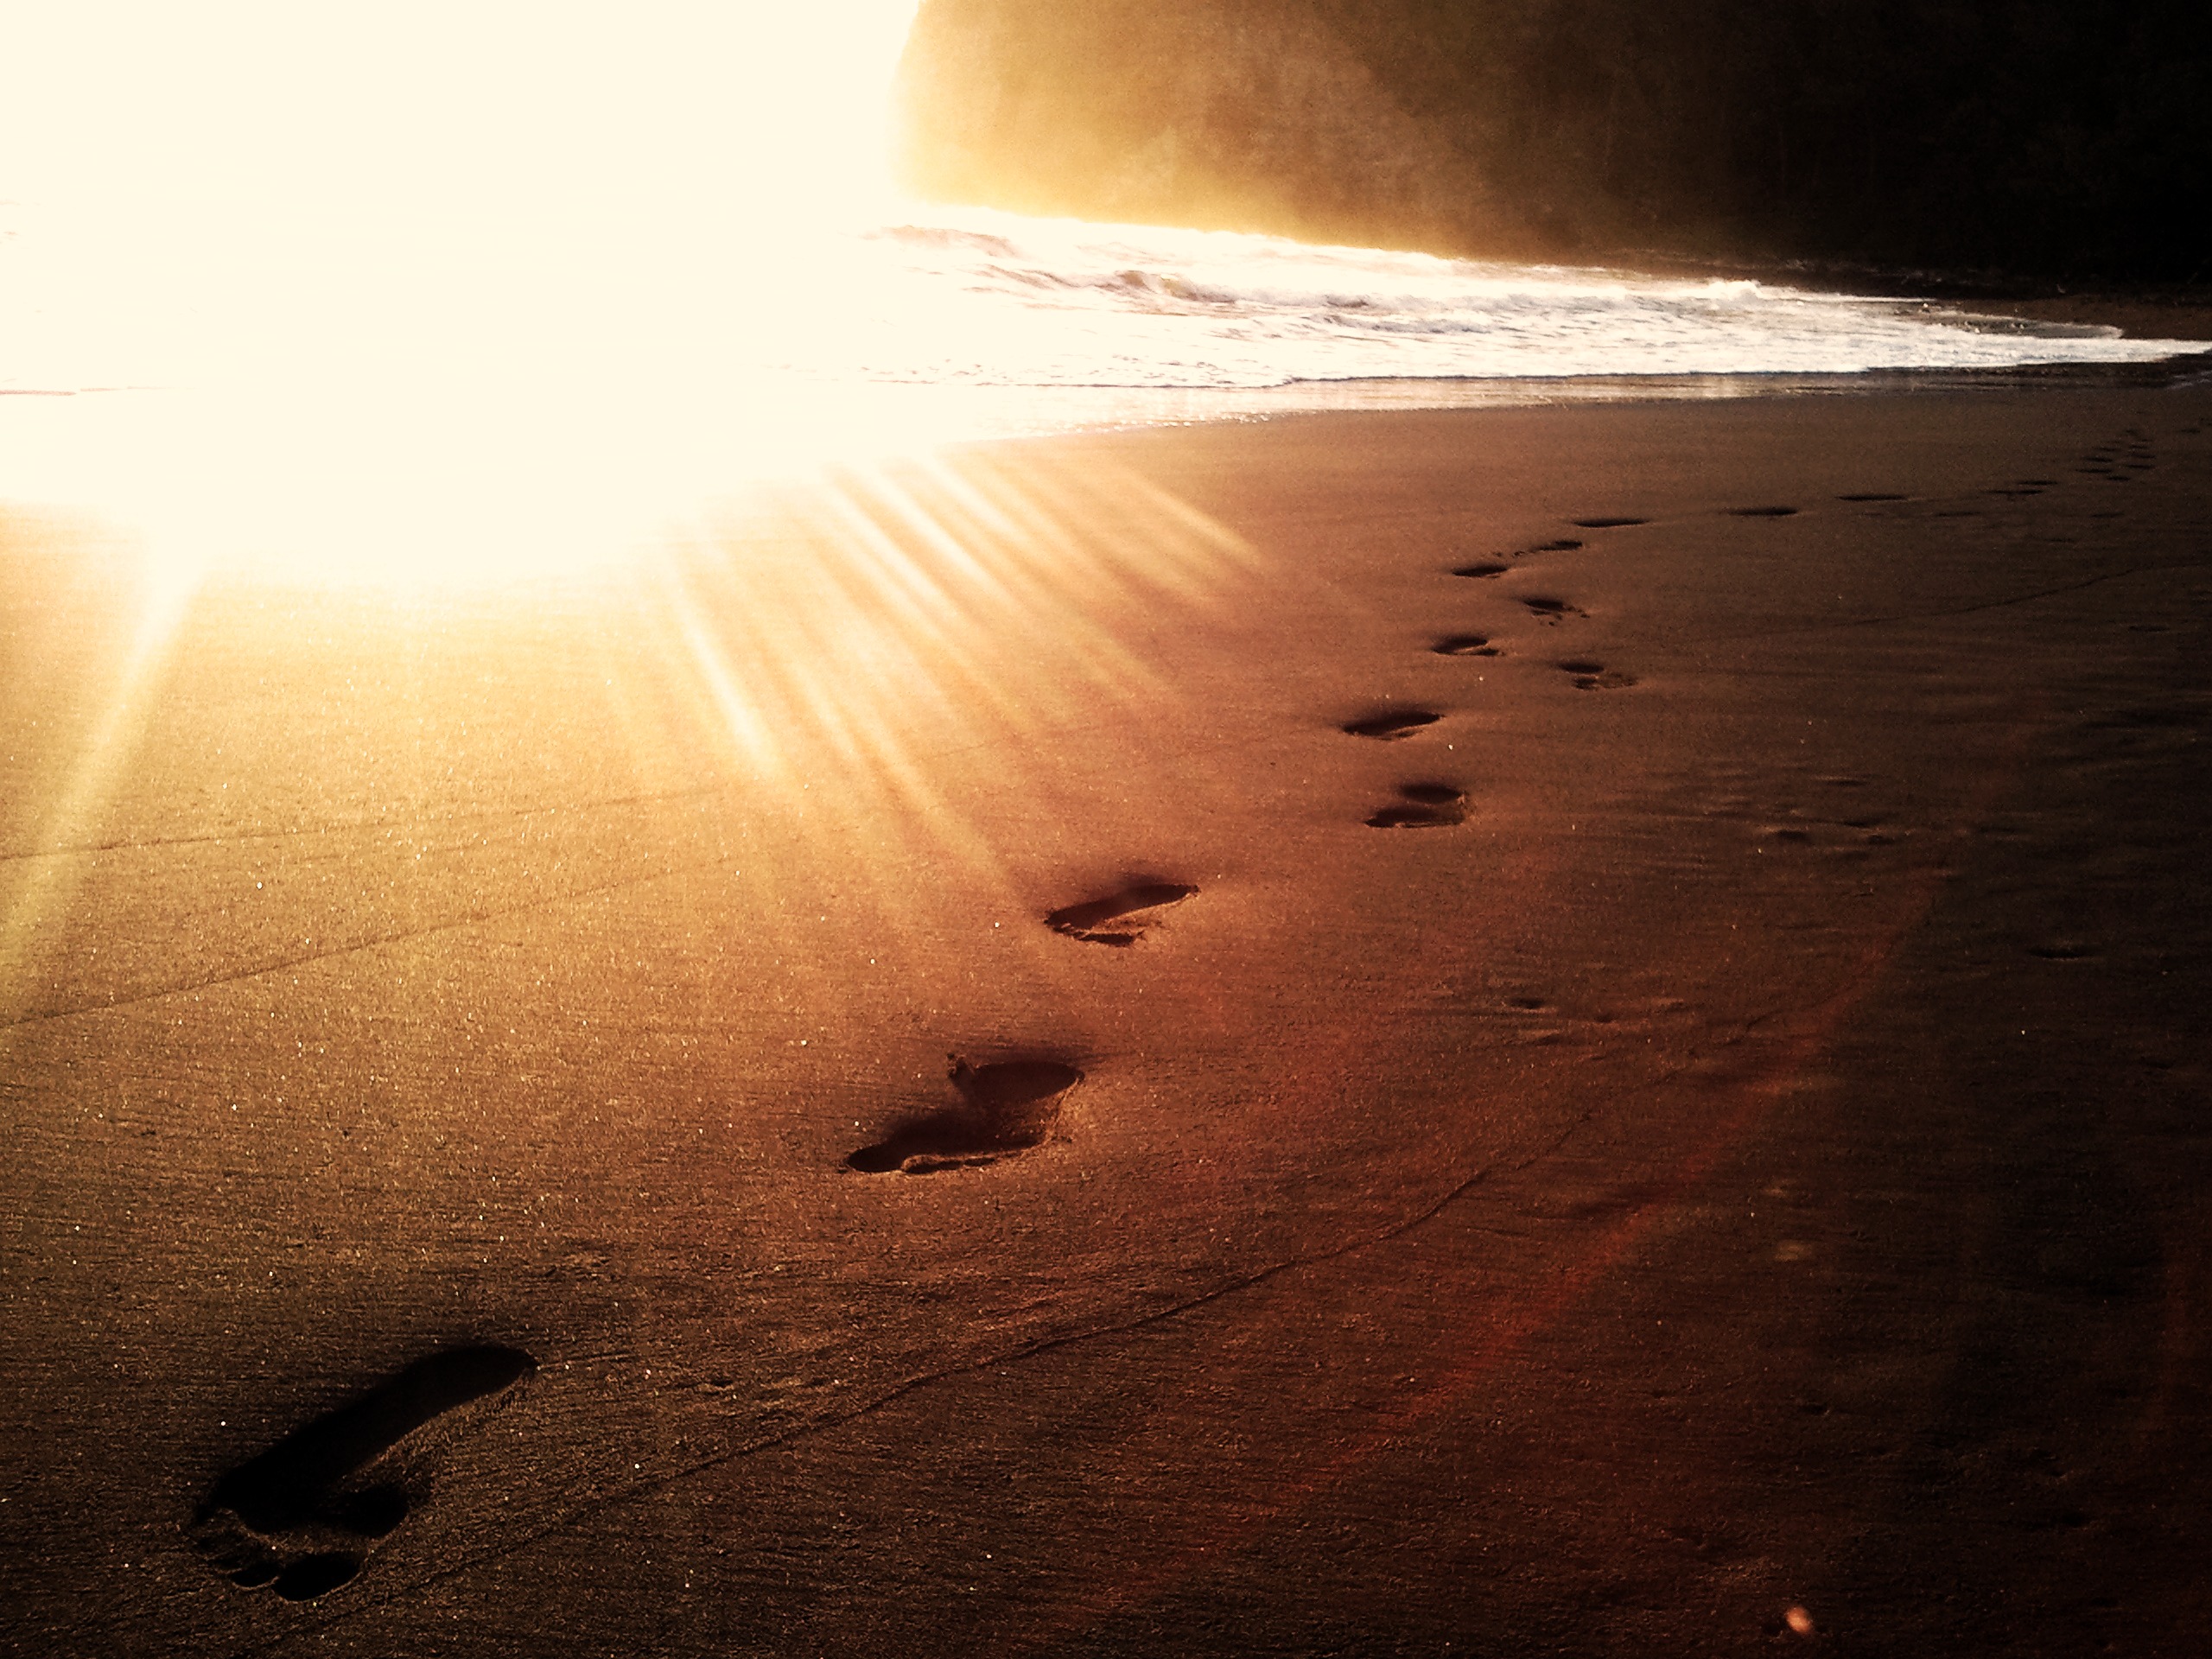 Footprints in the Sand Wallpaper   HD Images New